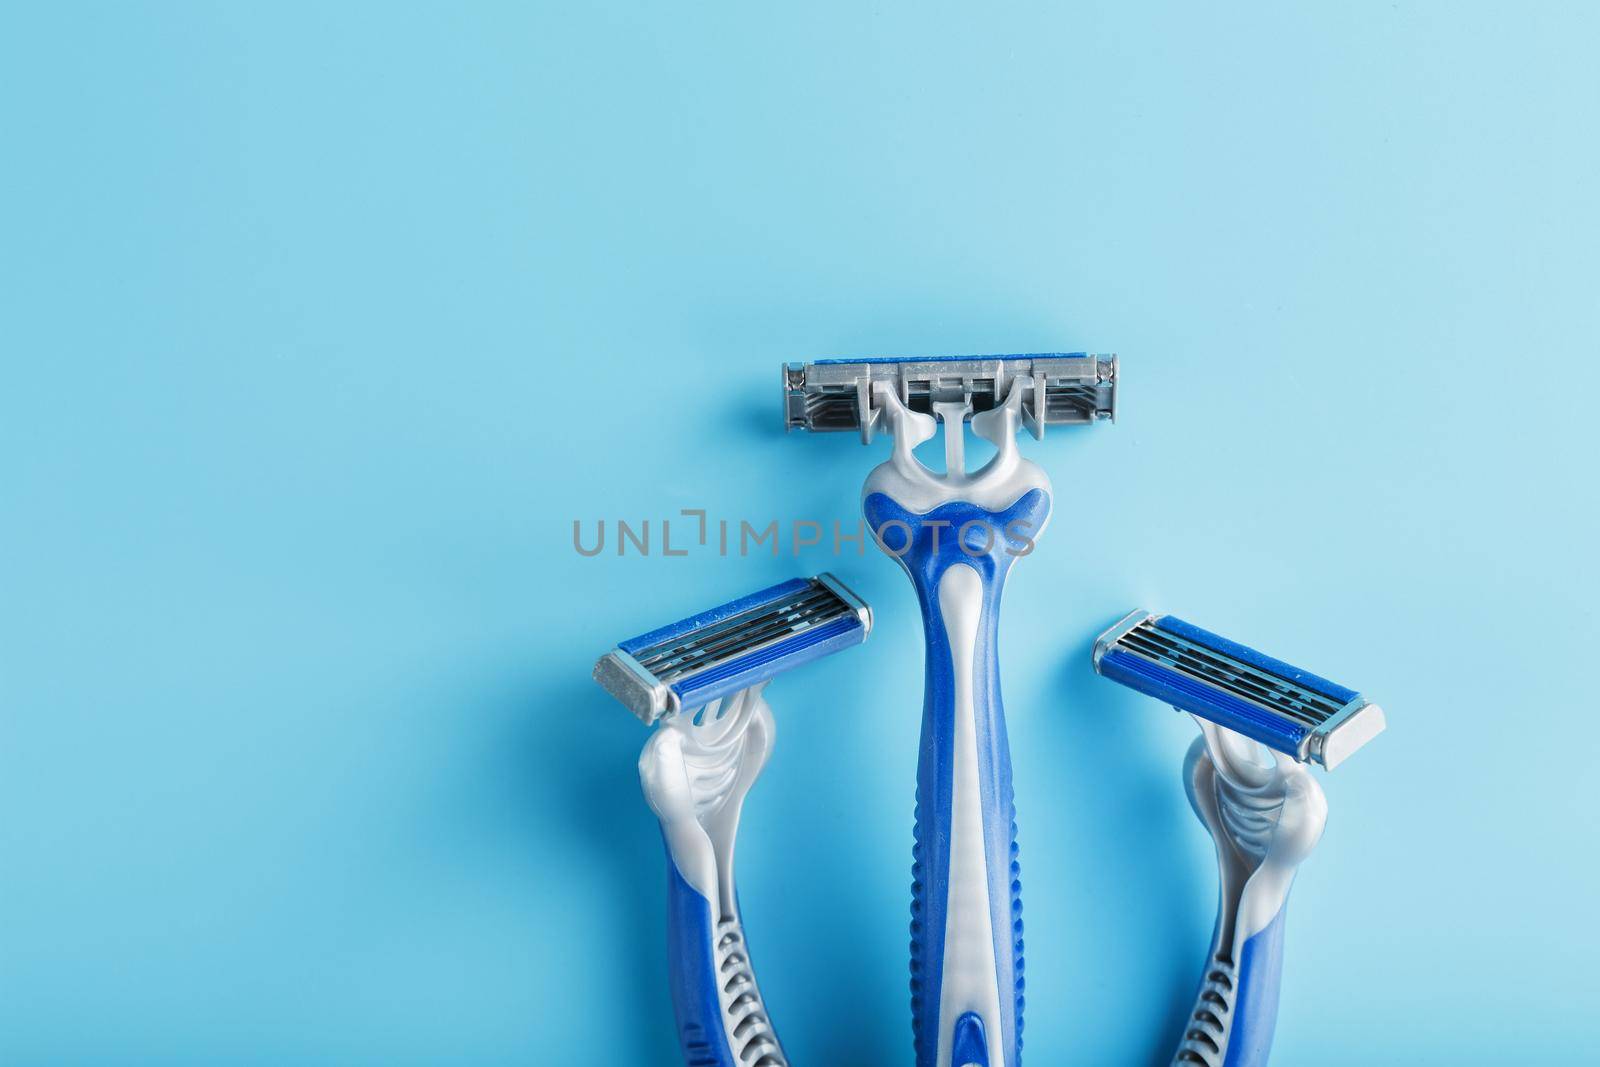 Blue shaving machine with sharp blades on the background of ice cubes close-up. The concept of cleanliness and frosty freshness